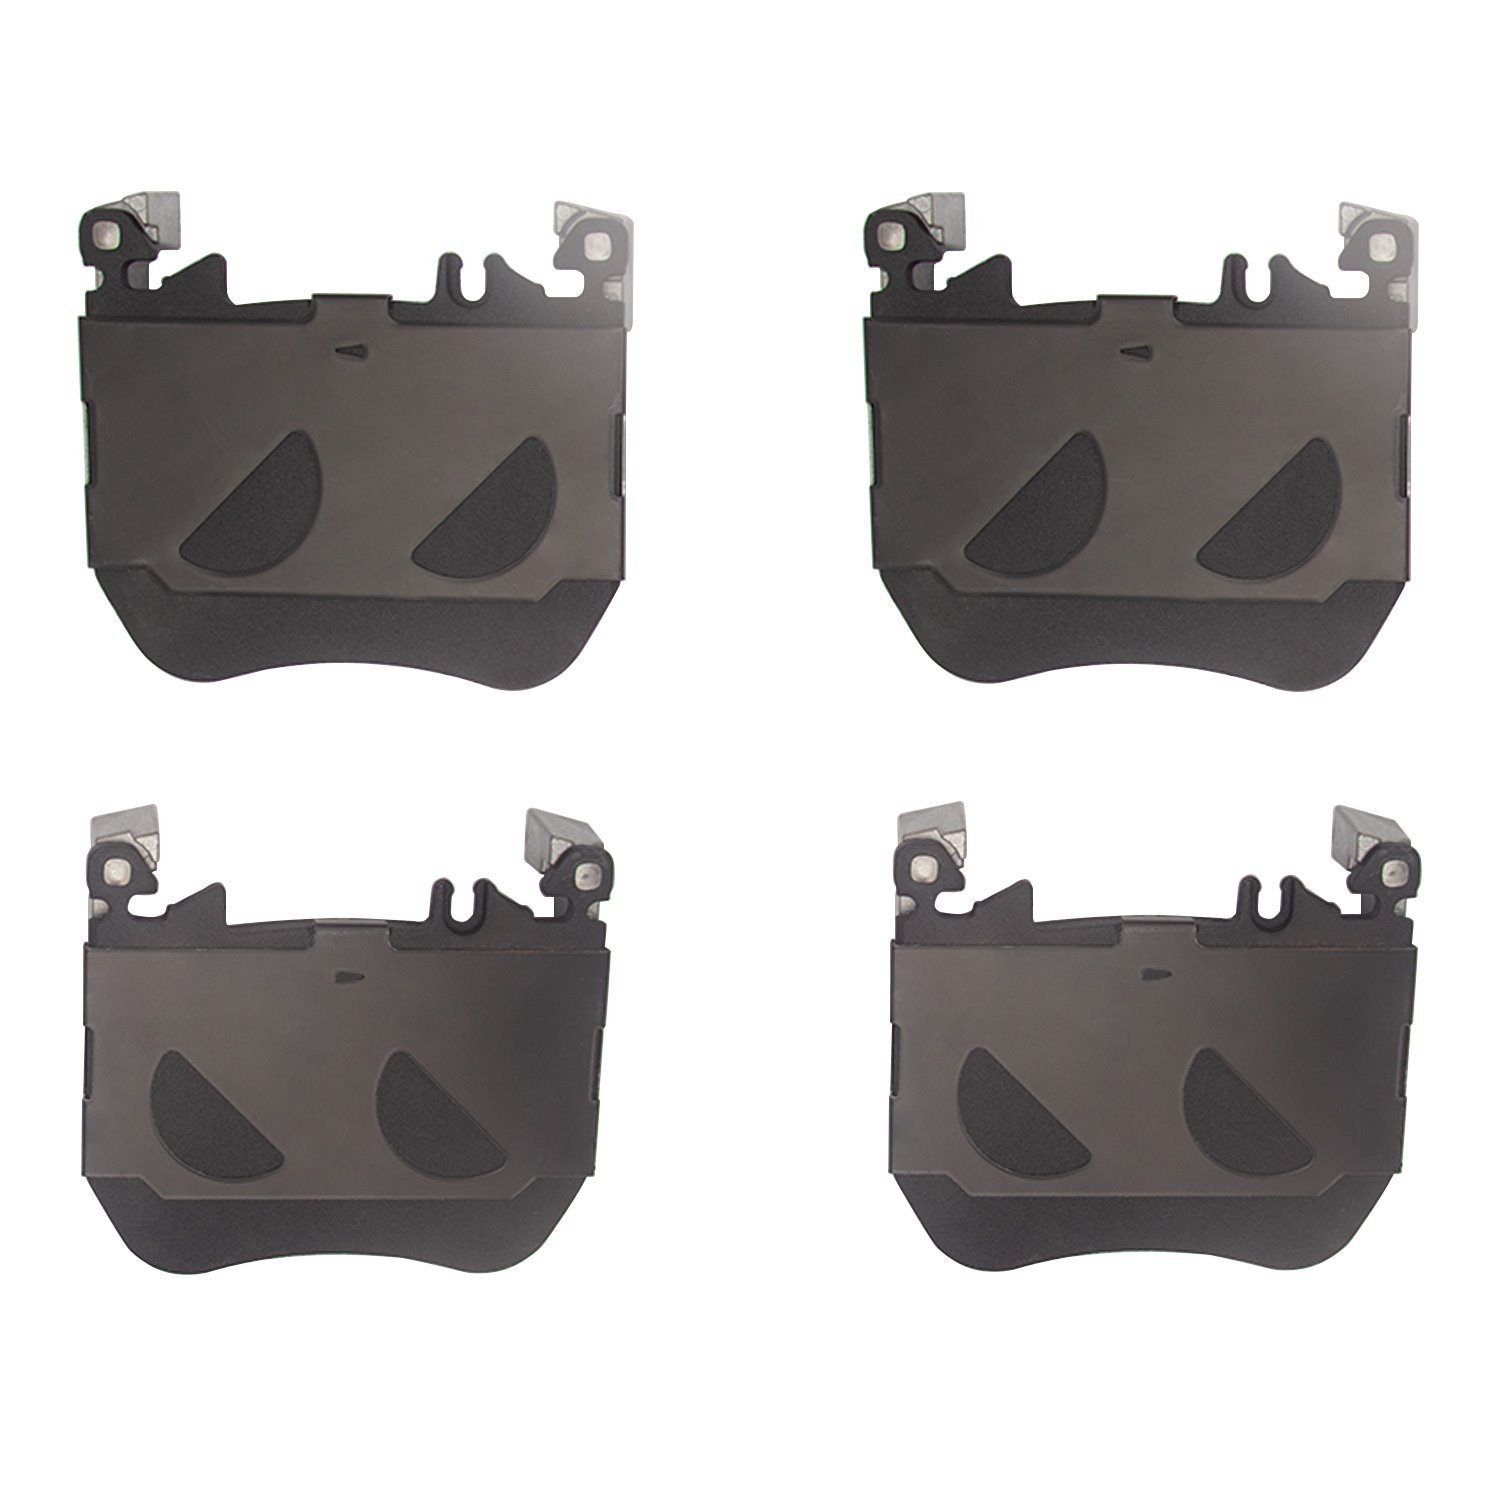 1551-2424-00 5000 Advanced Ceramic Brake Pads, Fits Select Mercedes-Benz, Position: Front